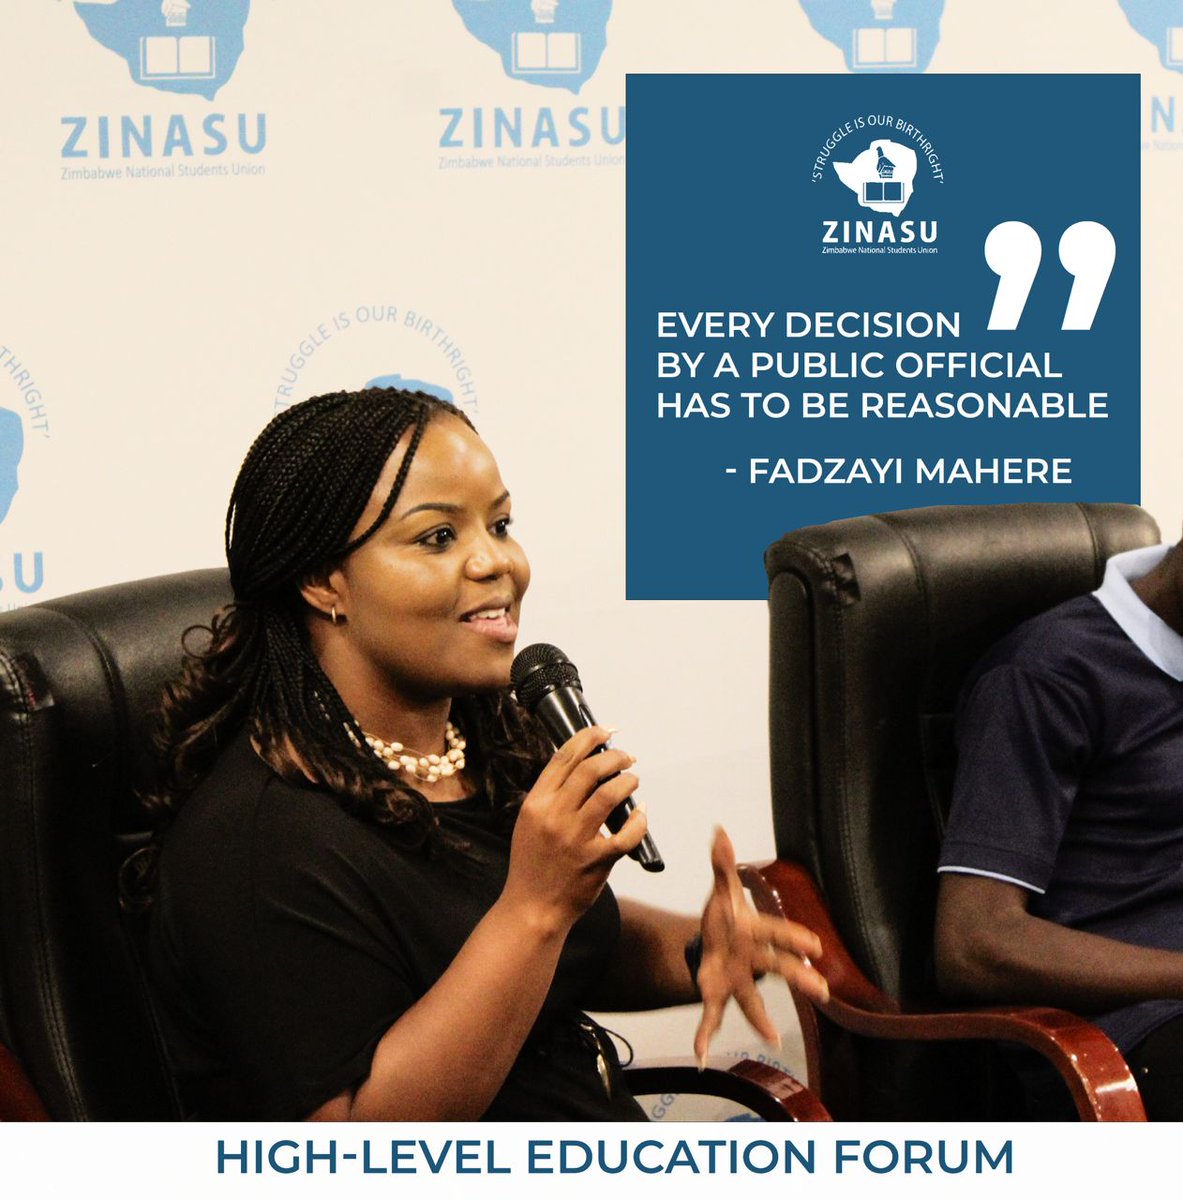 @Zinasuzim will be hosting the second edition of High-Level Education Forum . Discussing &Deliberating on how students voices can be amplified in policy formulation&implementation. Students inclusion& Participation in policy framework #HighLevelEducationForum
#EducatiomForAll